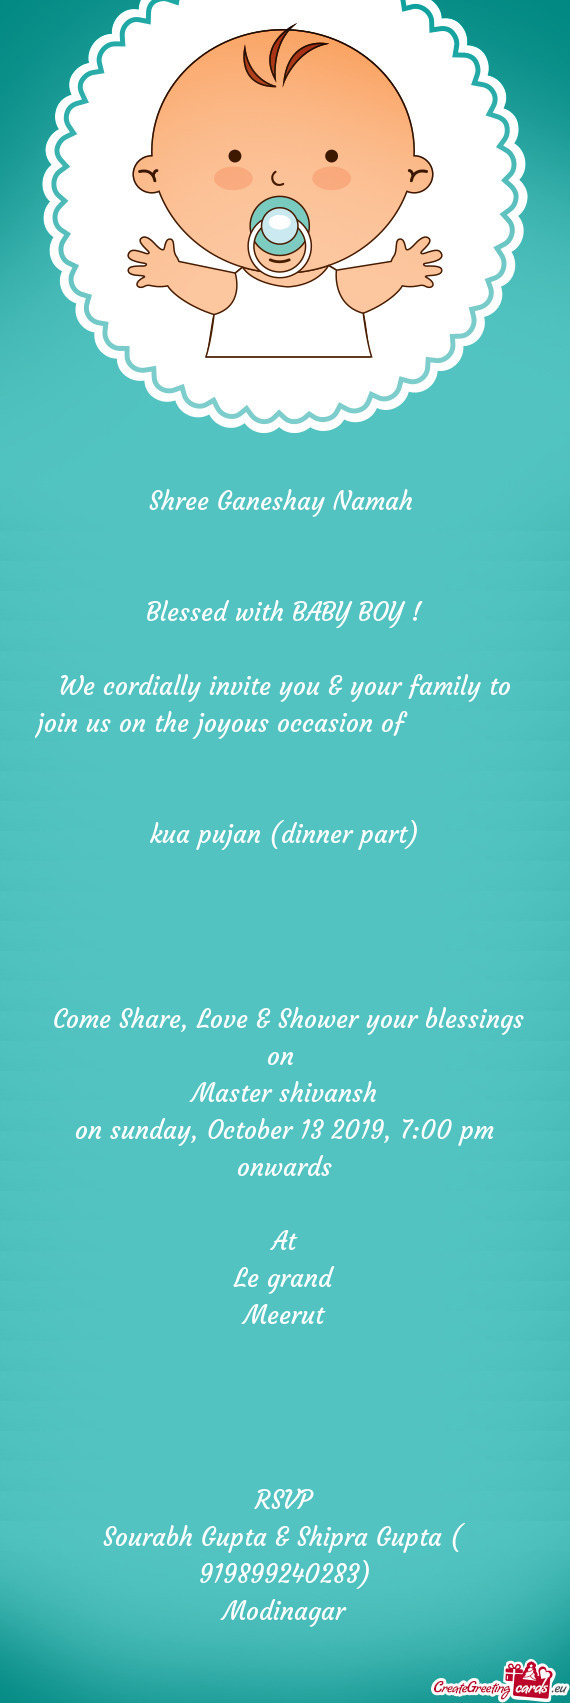 We cordially invite you & your family to join us on the joyous occasion of